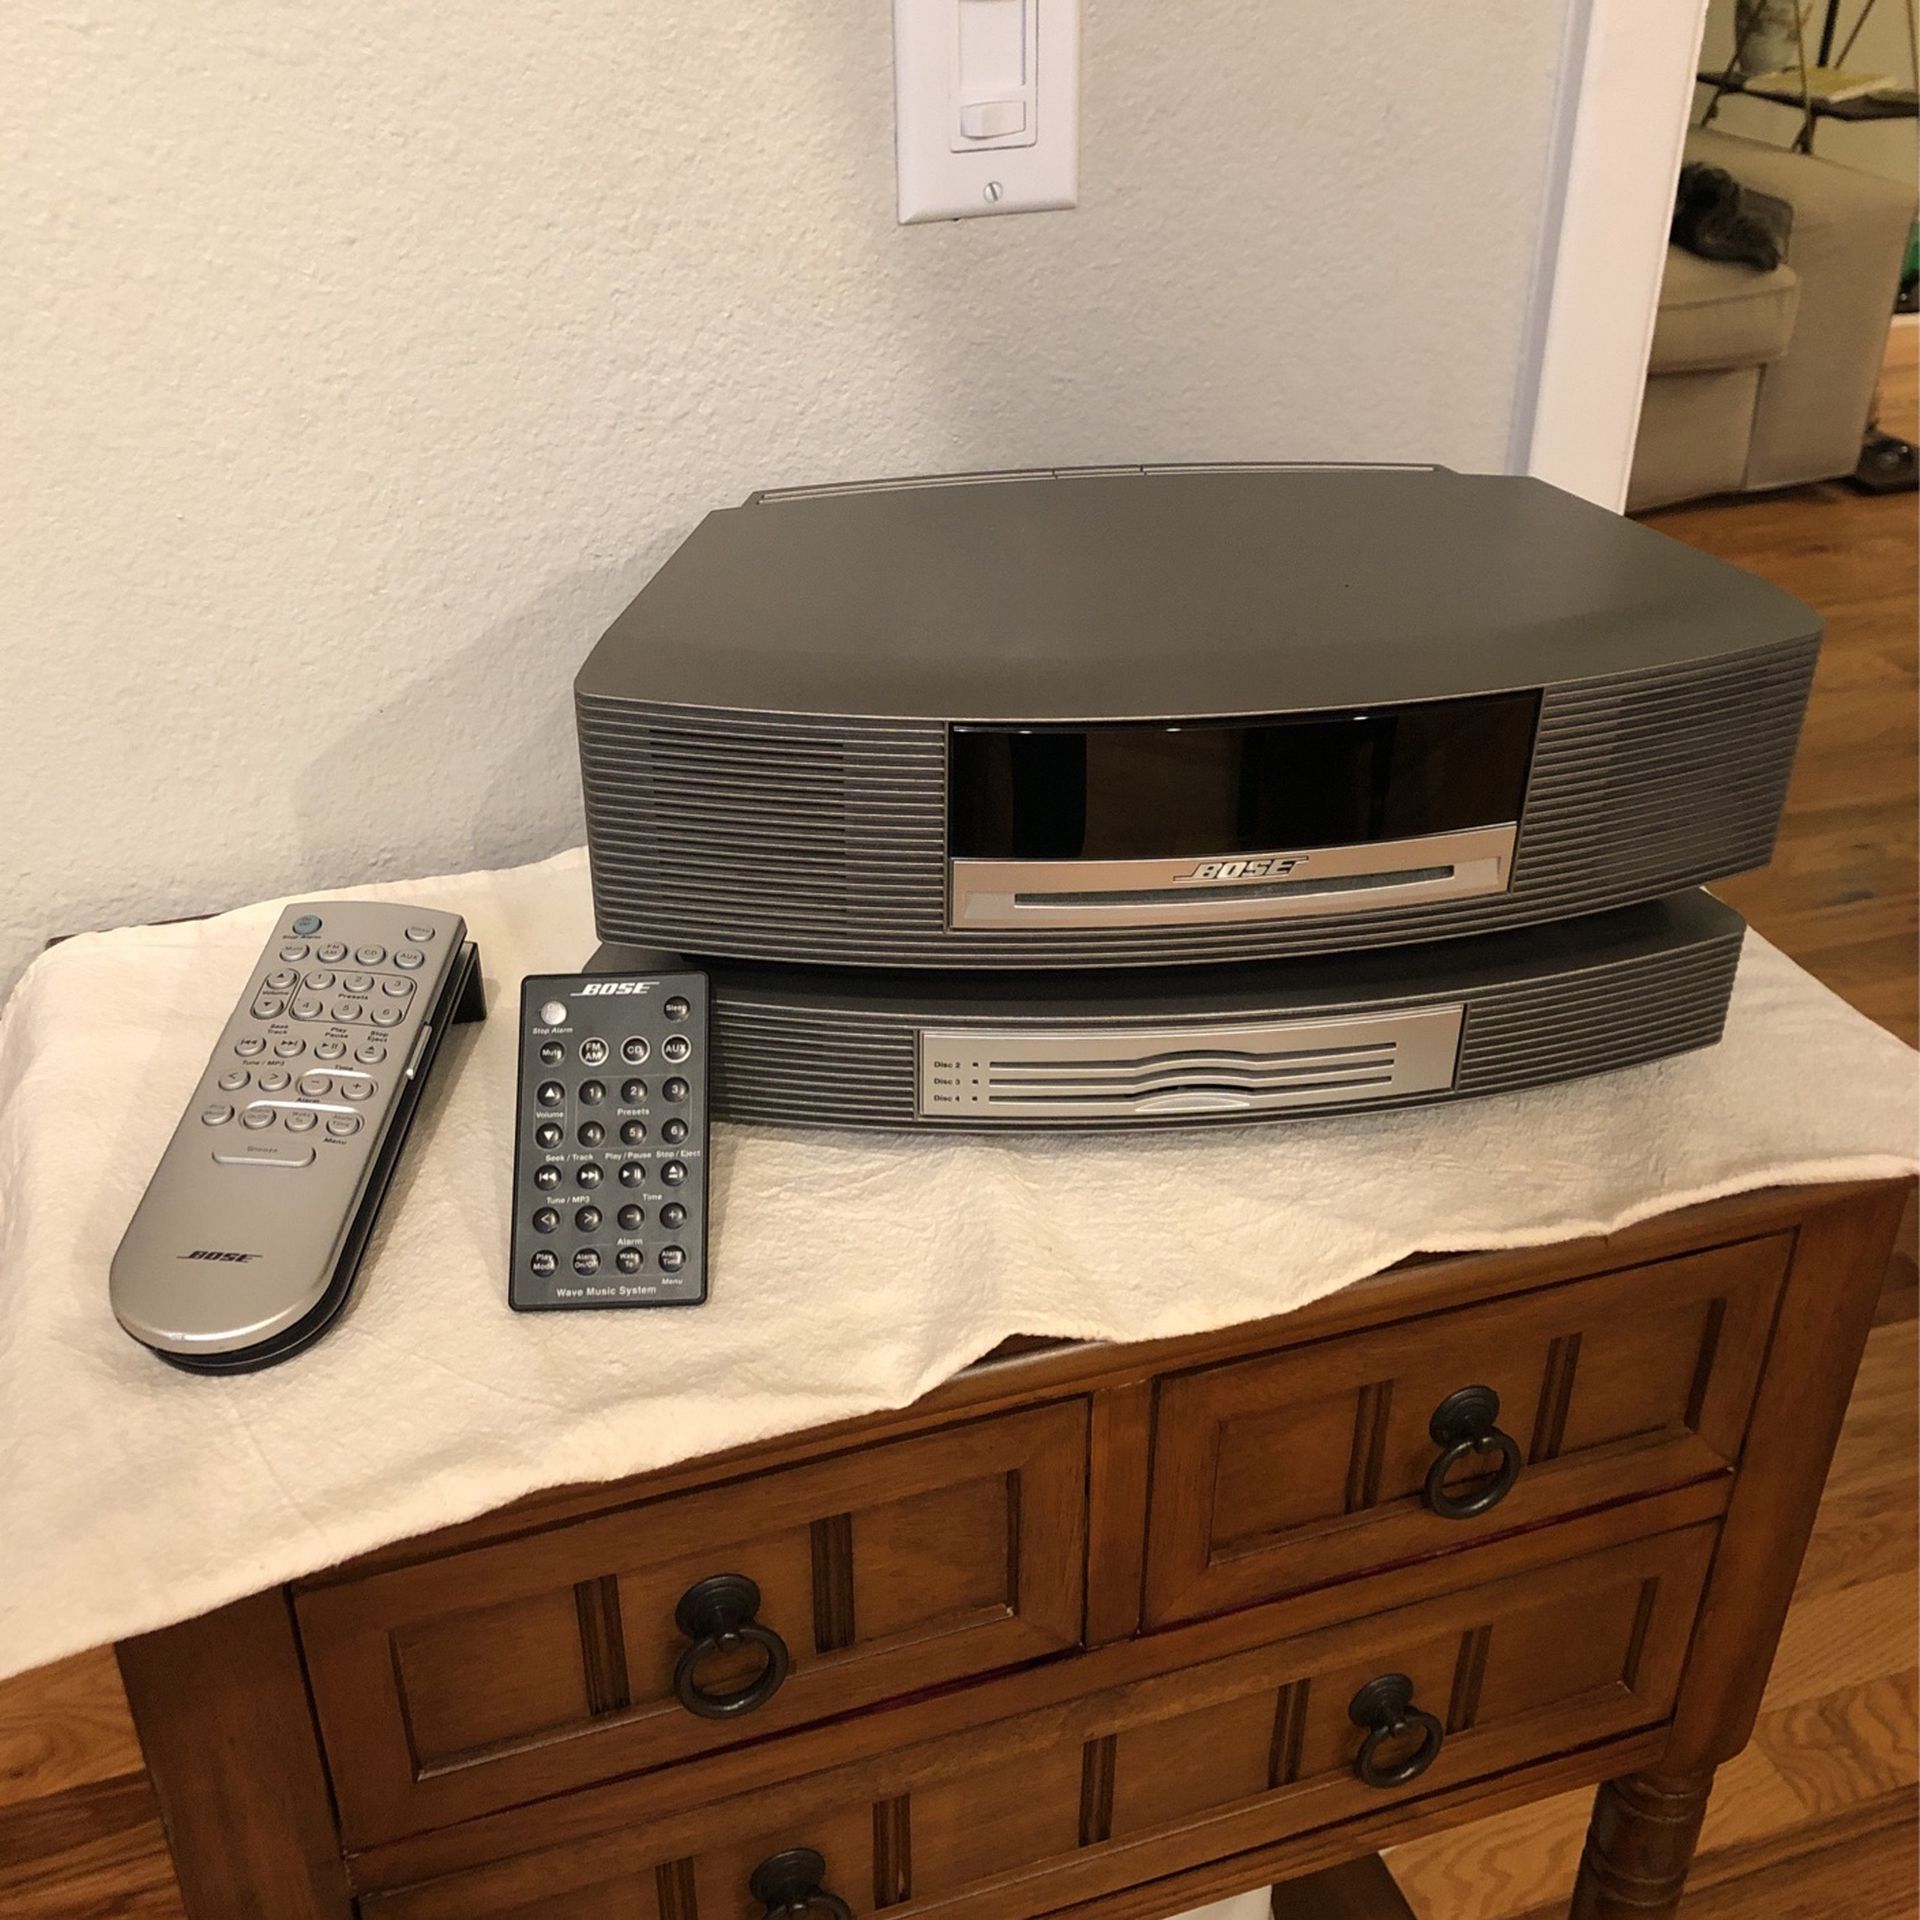 Bose wave music system with multi CD changer. Includes two remotes.￼